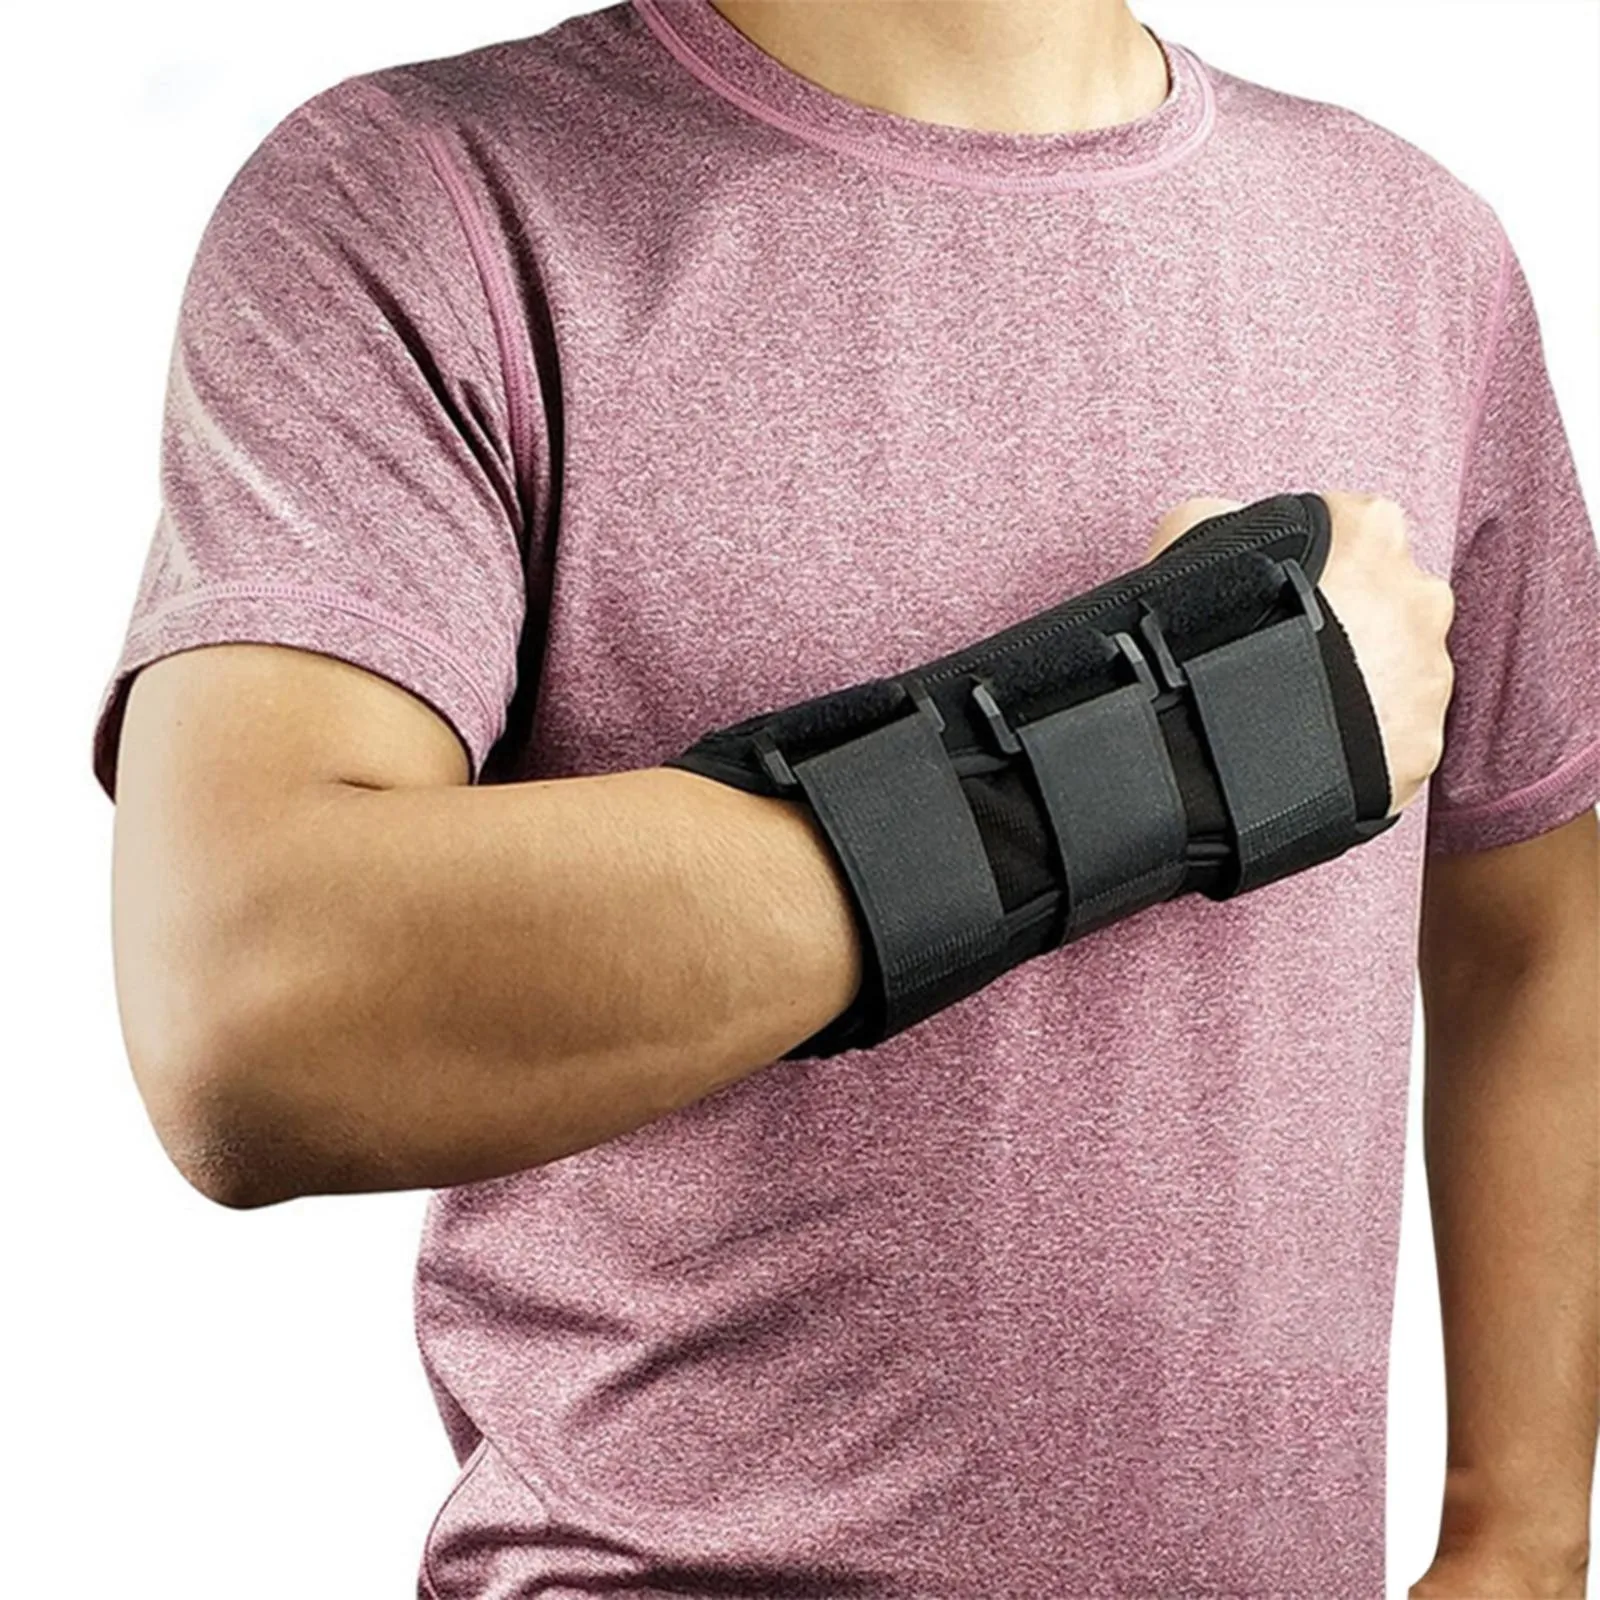 Padded Carpal Tunnel Wrist Support And Hand Knee P...